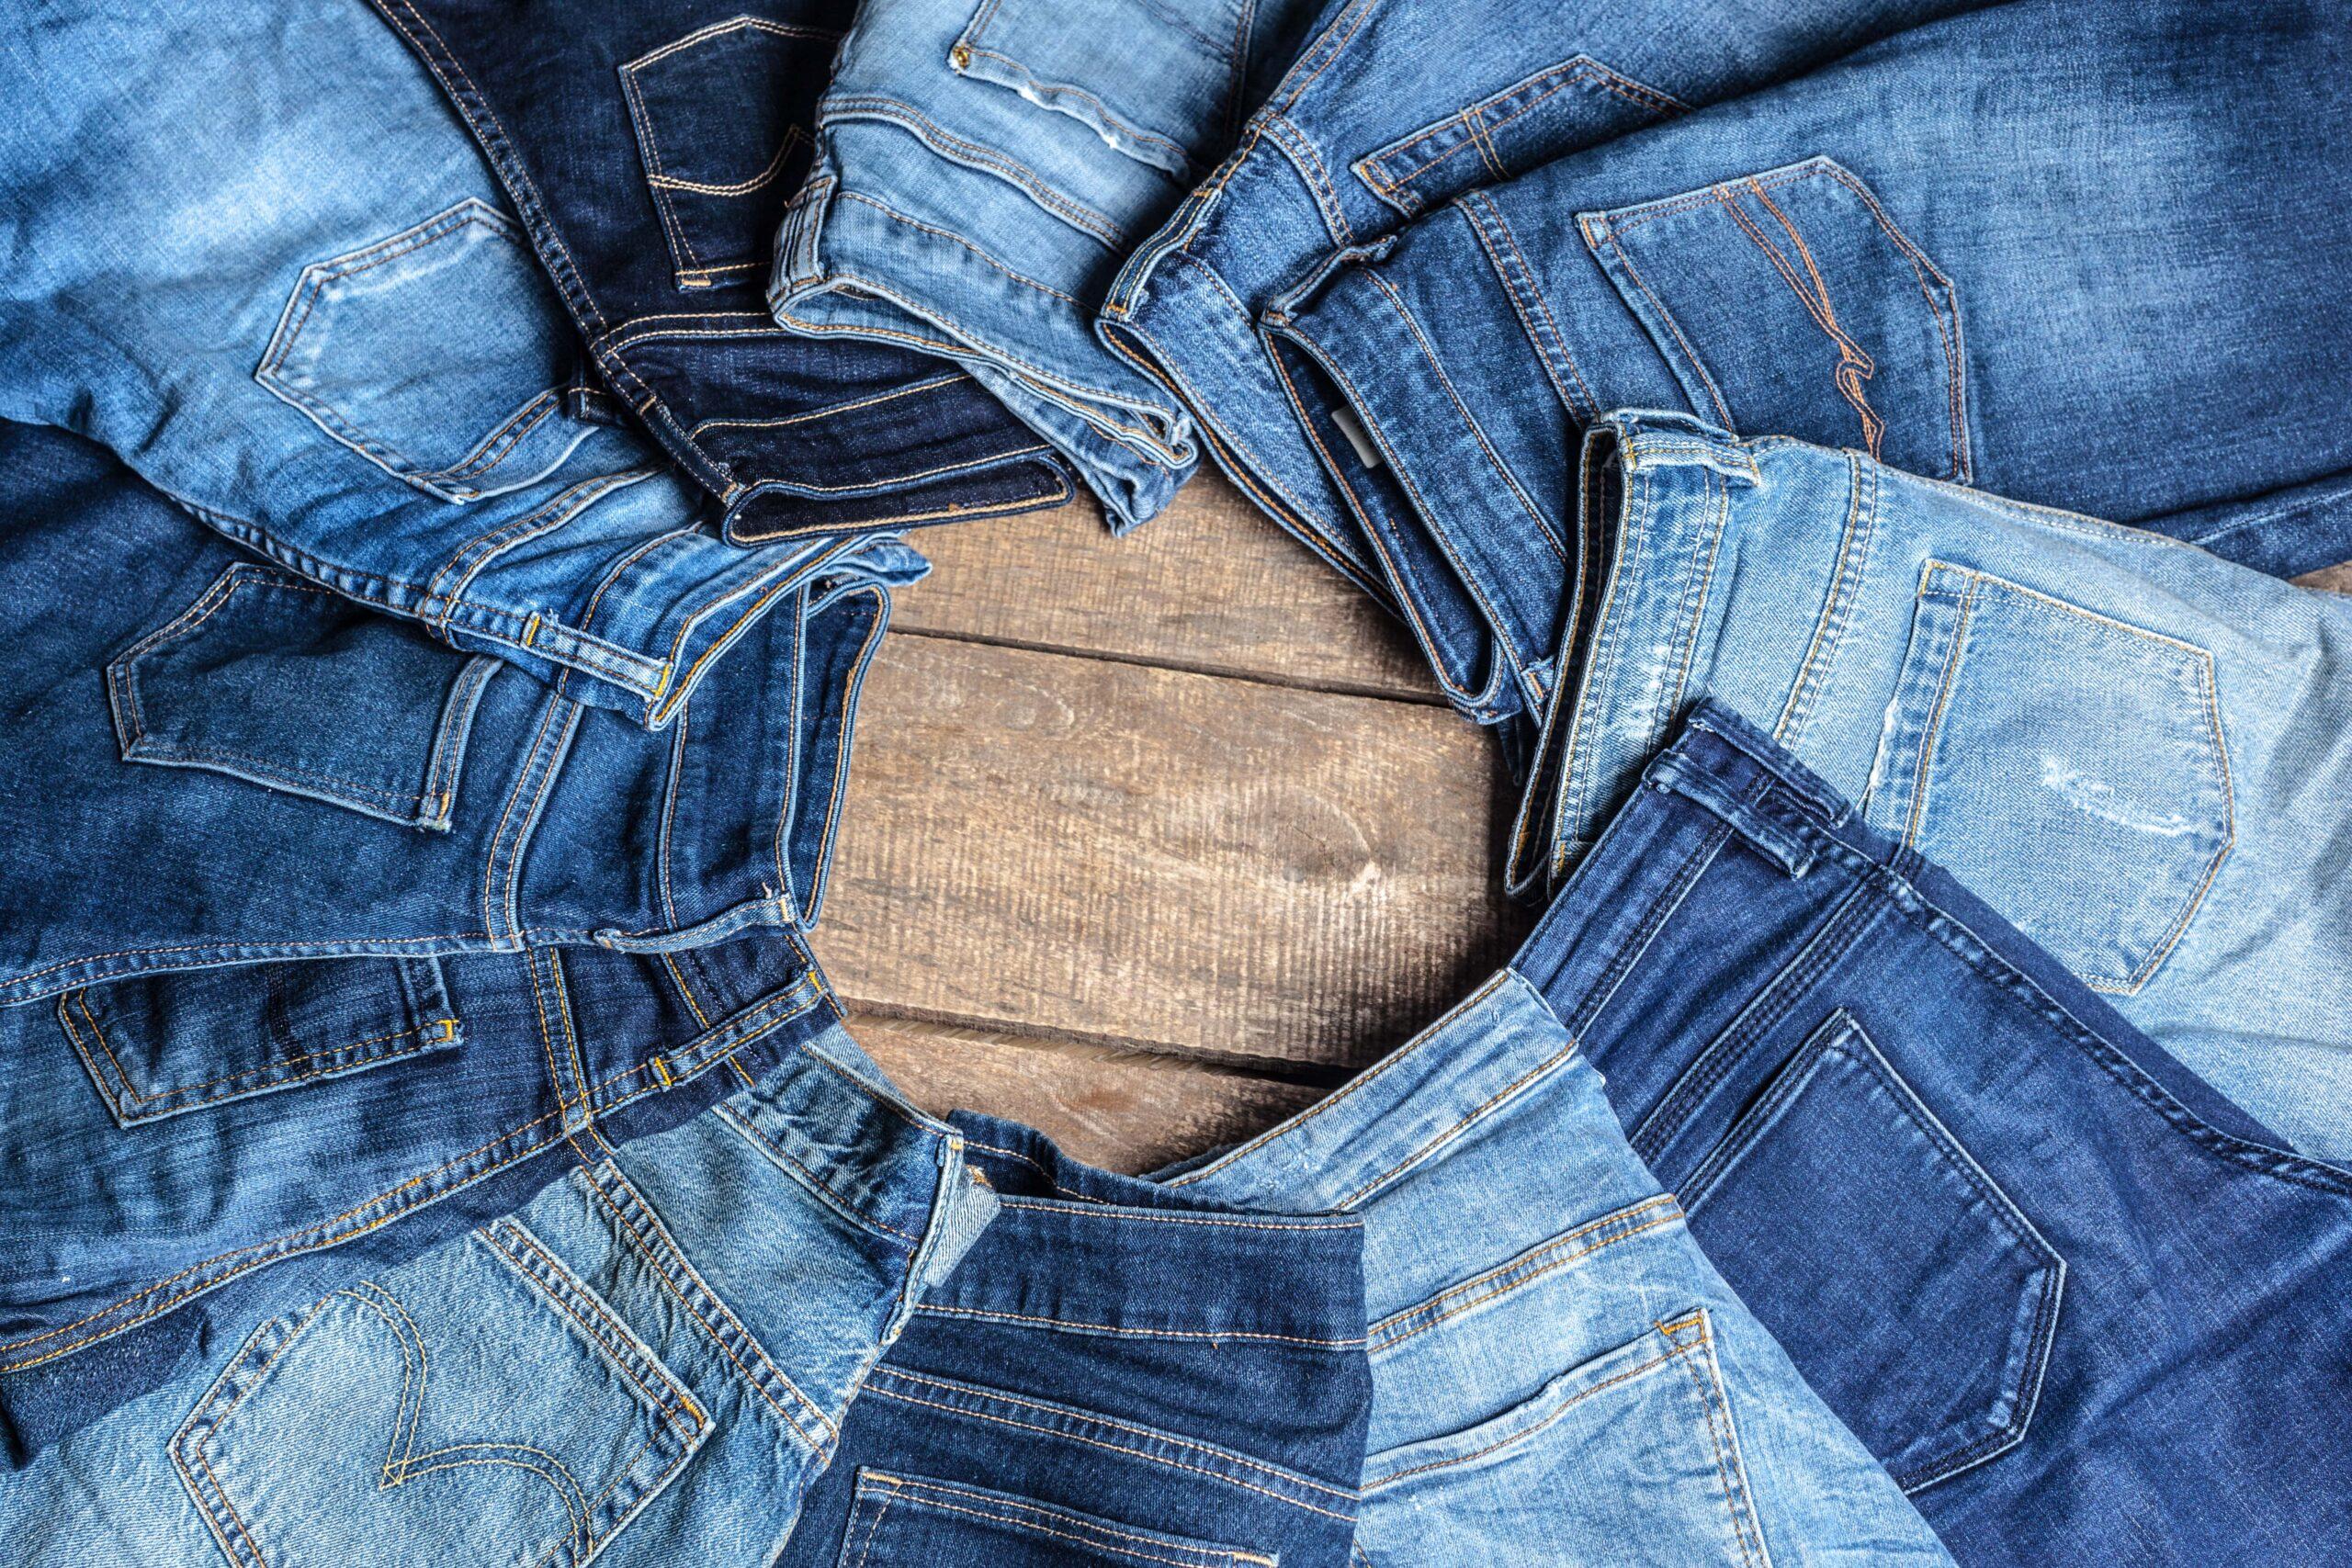 Why Women’s Jeans Don’t Have Pockets: The Simple Truth.